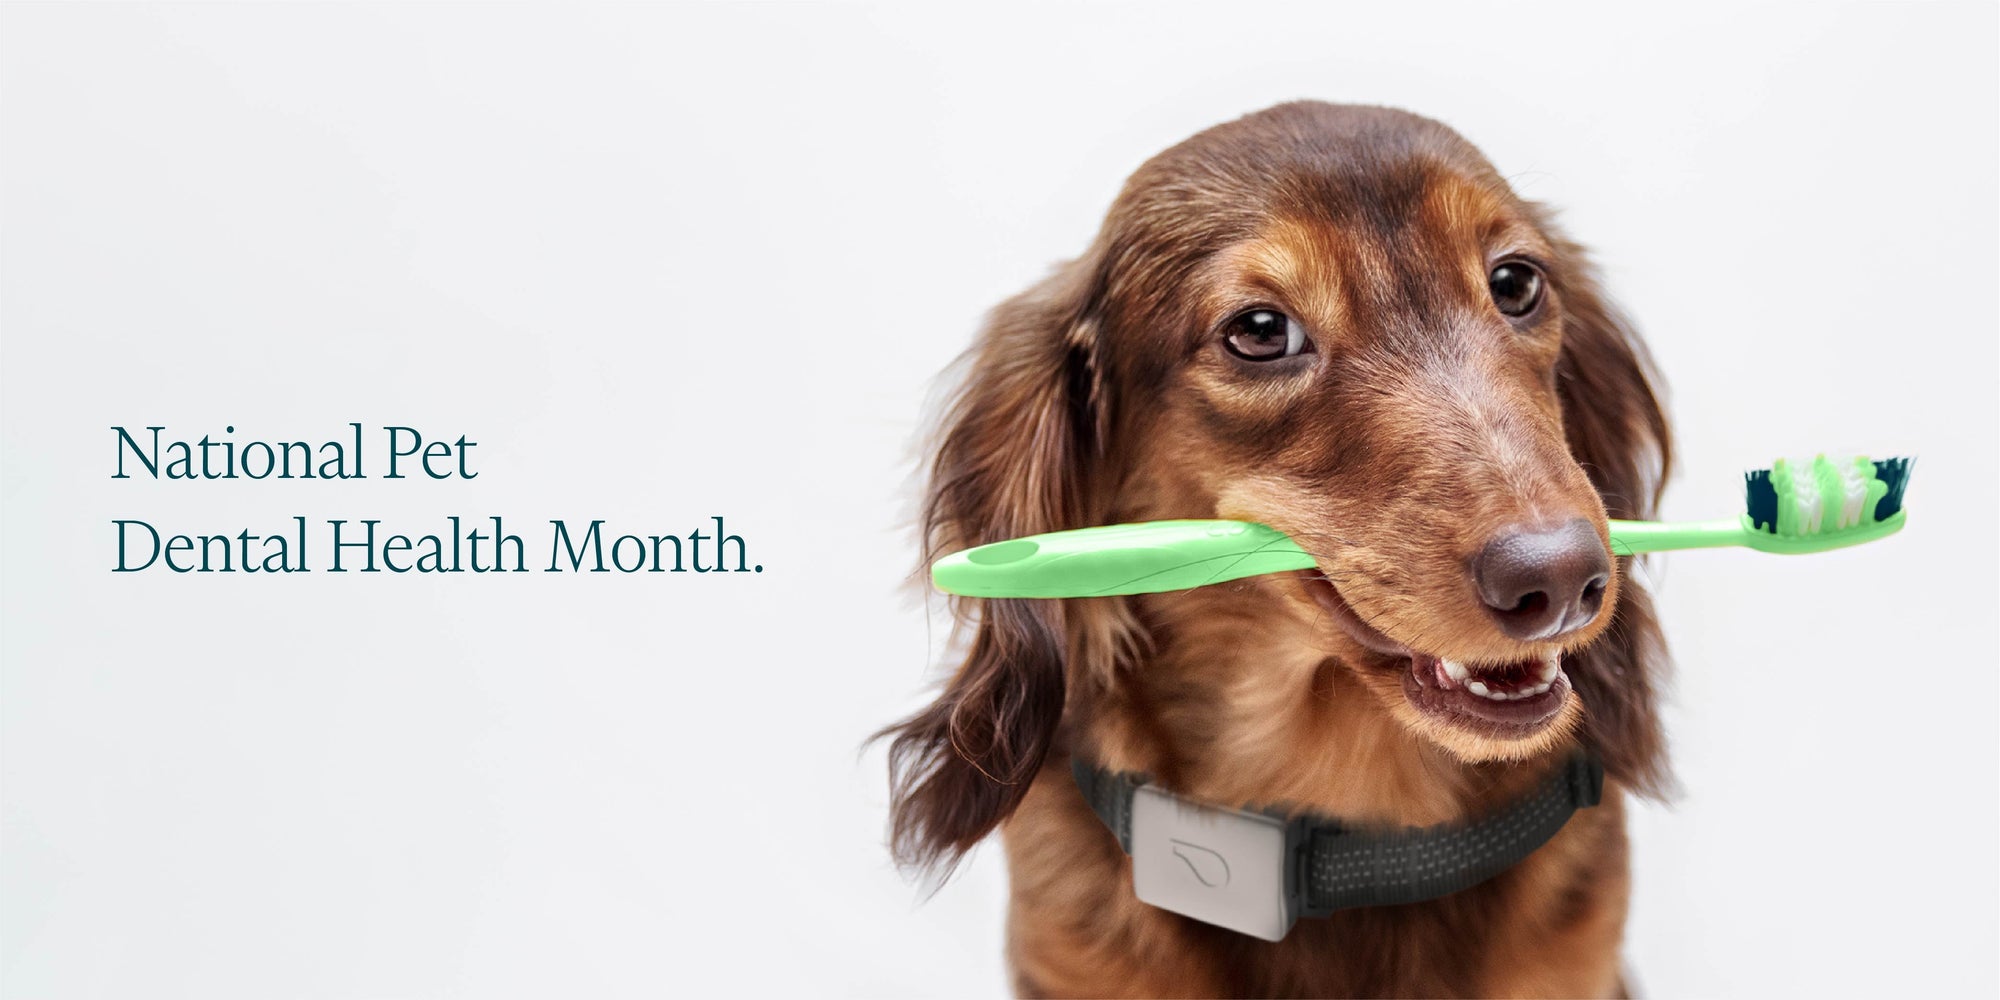 Smile, It’s National Pet Dental Health Month - Whistle